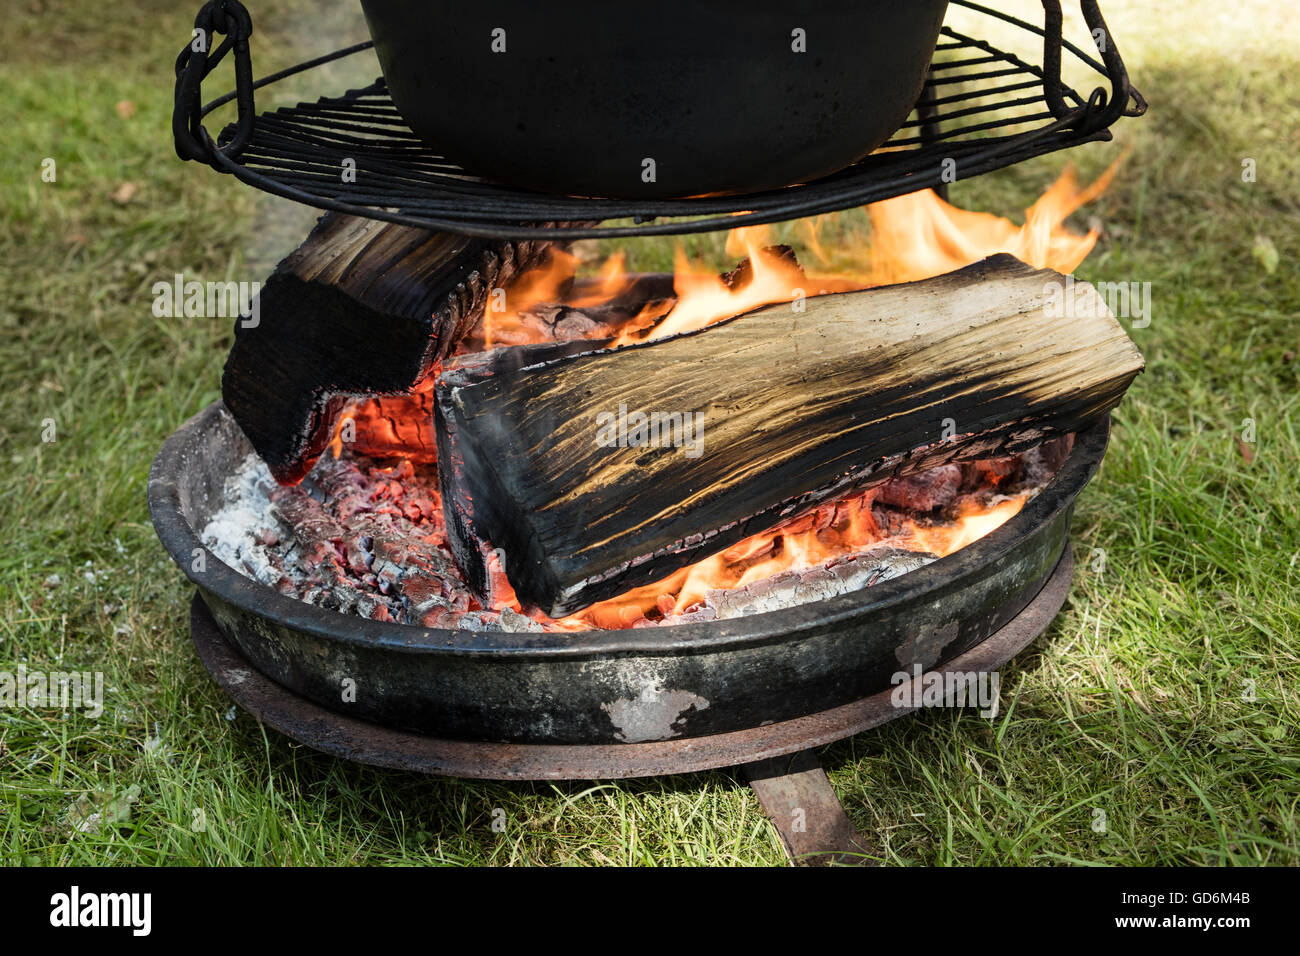 https://c8.alamy.com/comp/GD6M4B/big-cooking-pot-placed-on-fire-in-a-camping-outdoors-GD6M4B.jpg